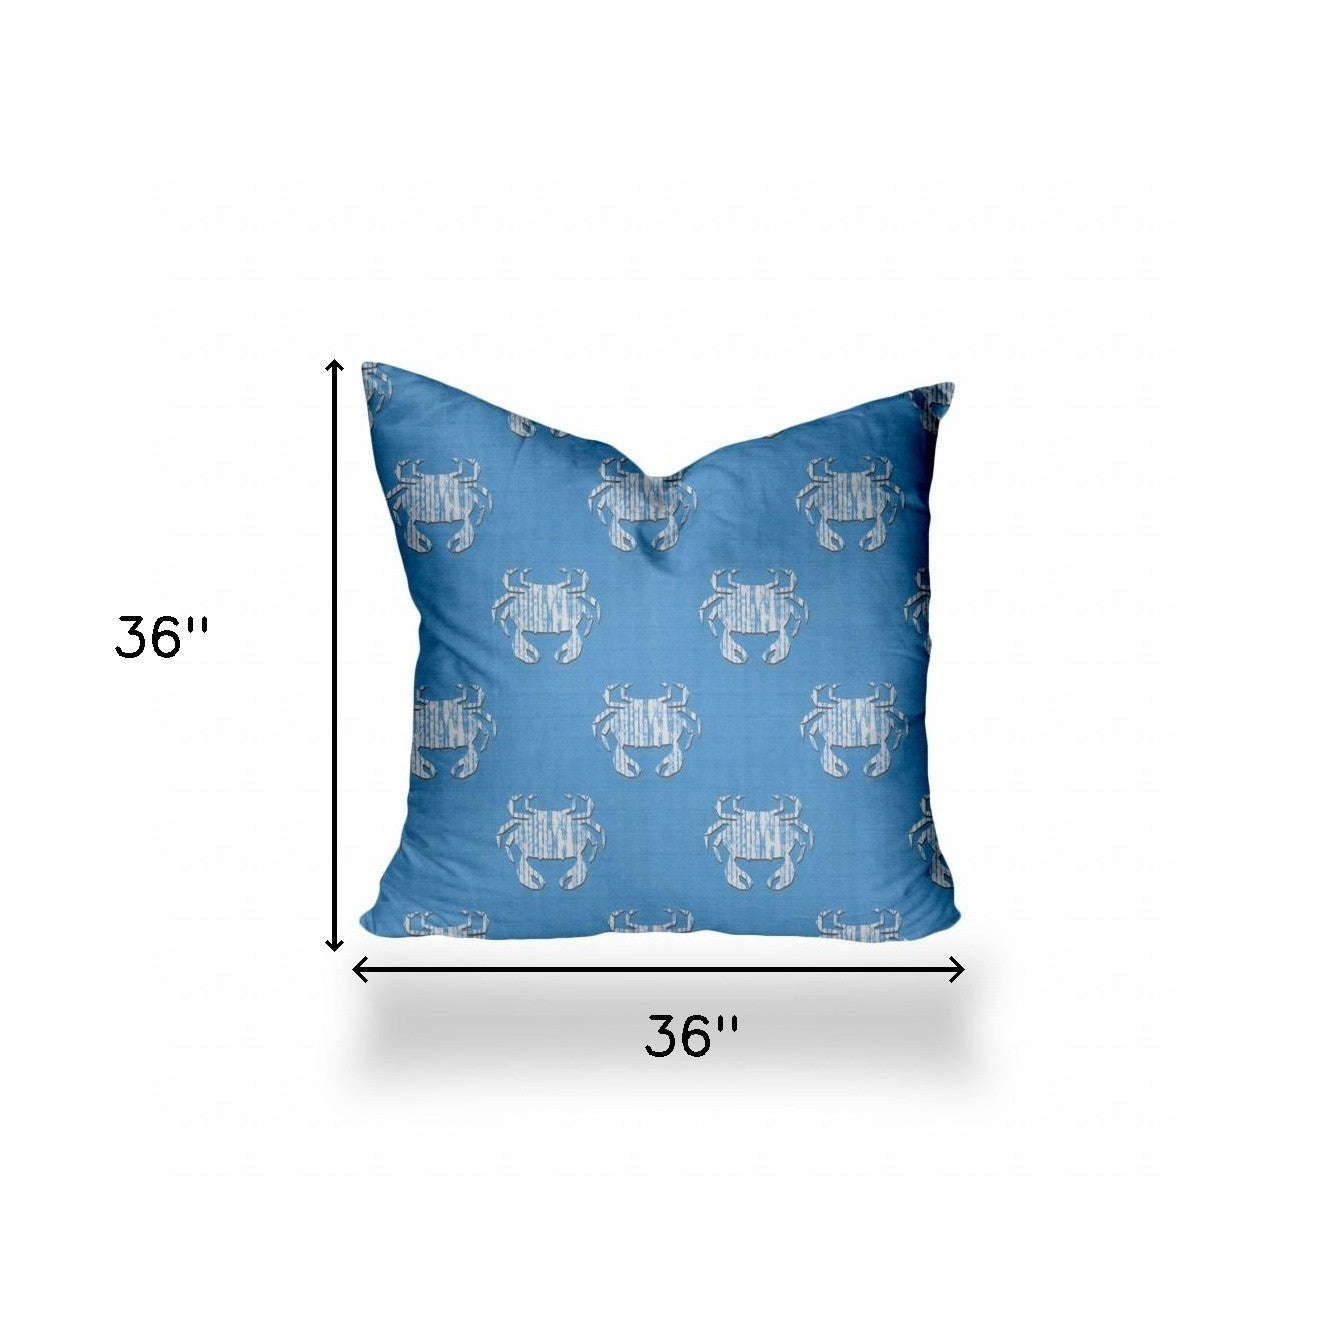 36" X 36" Blue And White Crab Enveloped Coastal Throw Indoor Outdoor Pillow